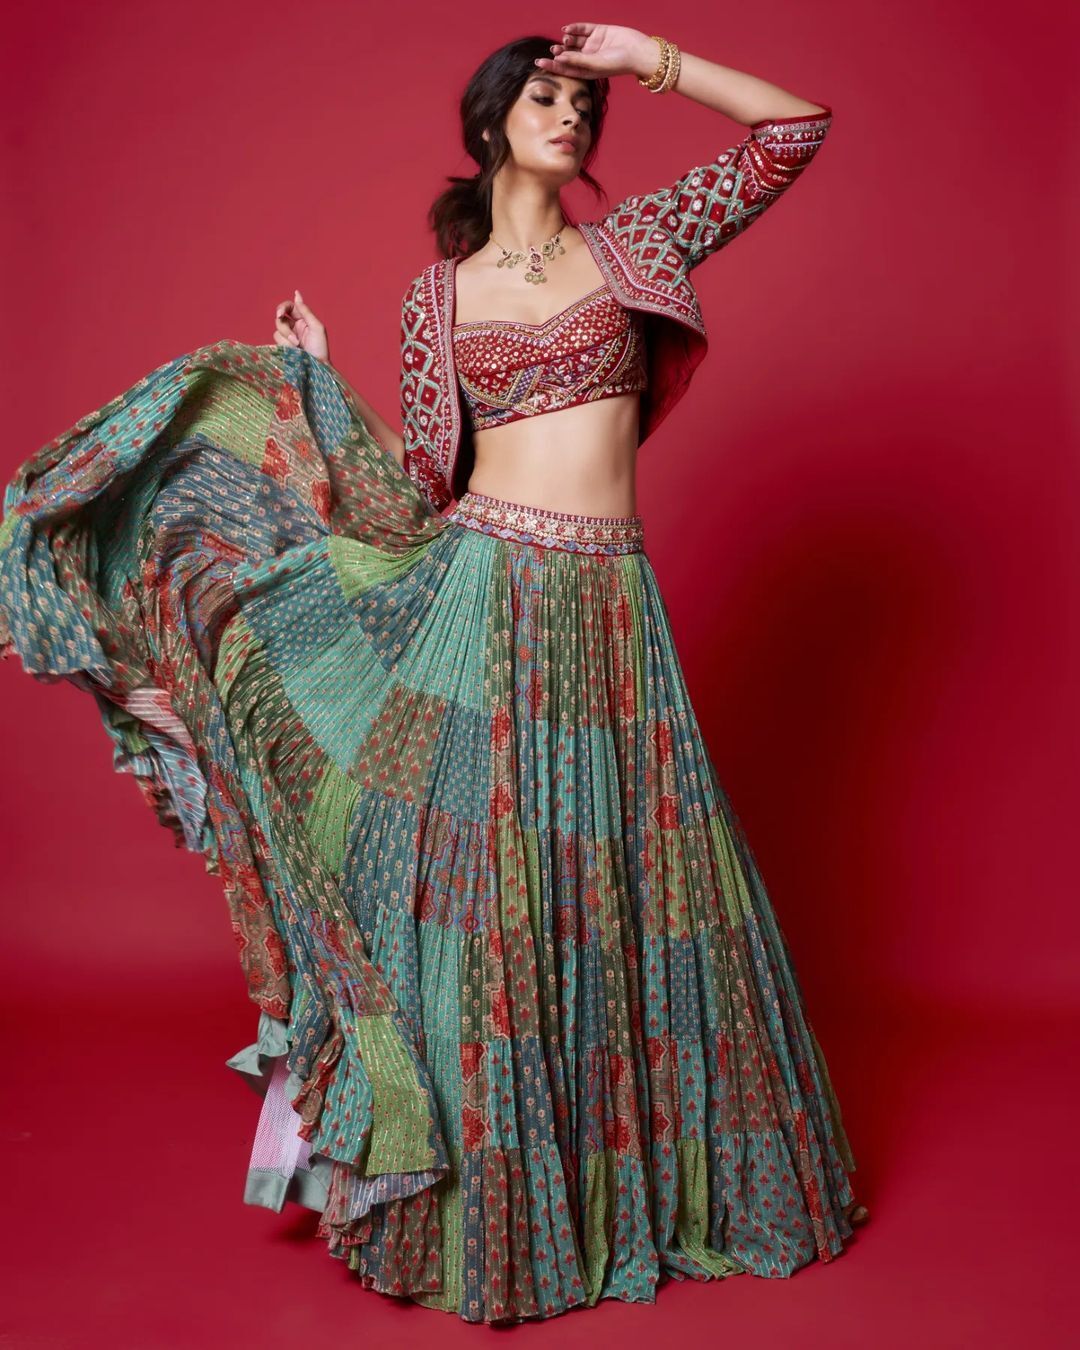 we are crushing on this lehenga with jacket outfit